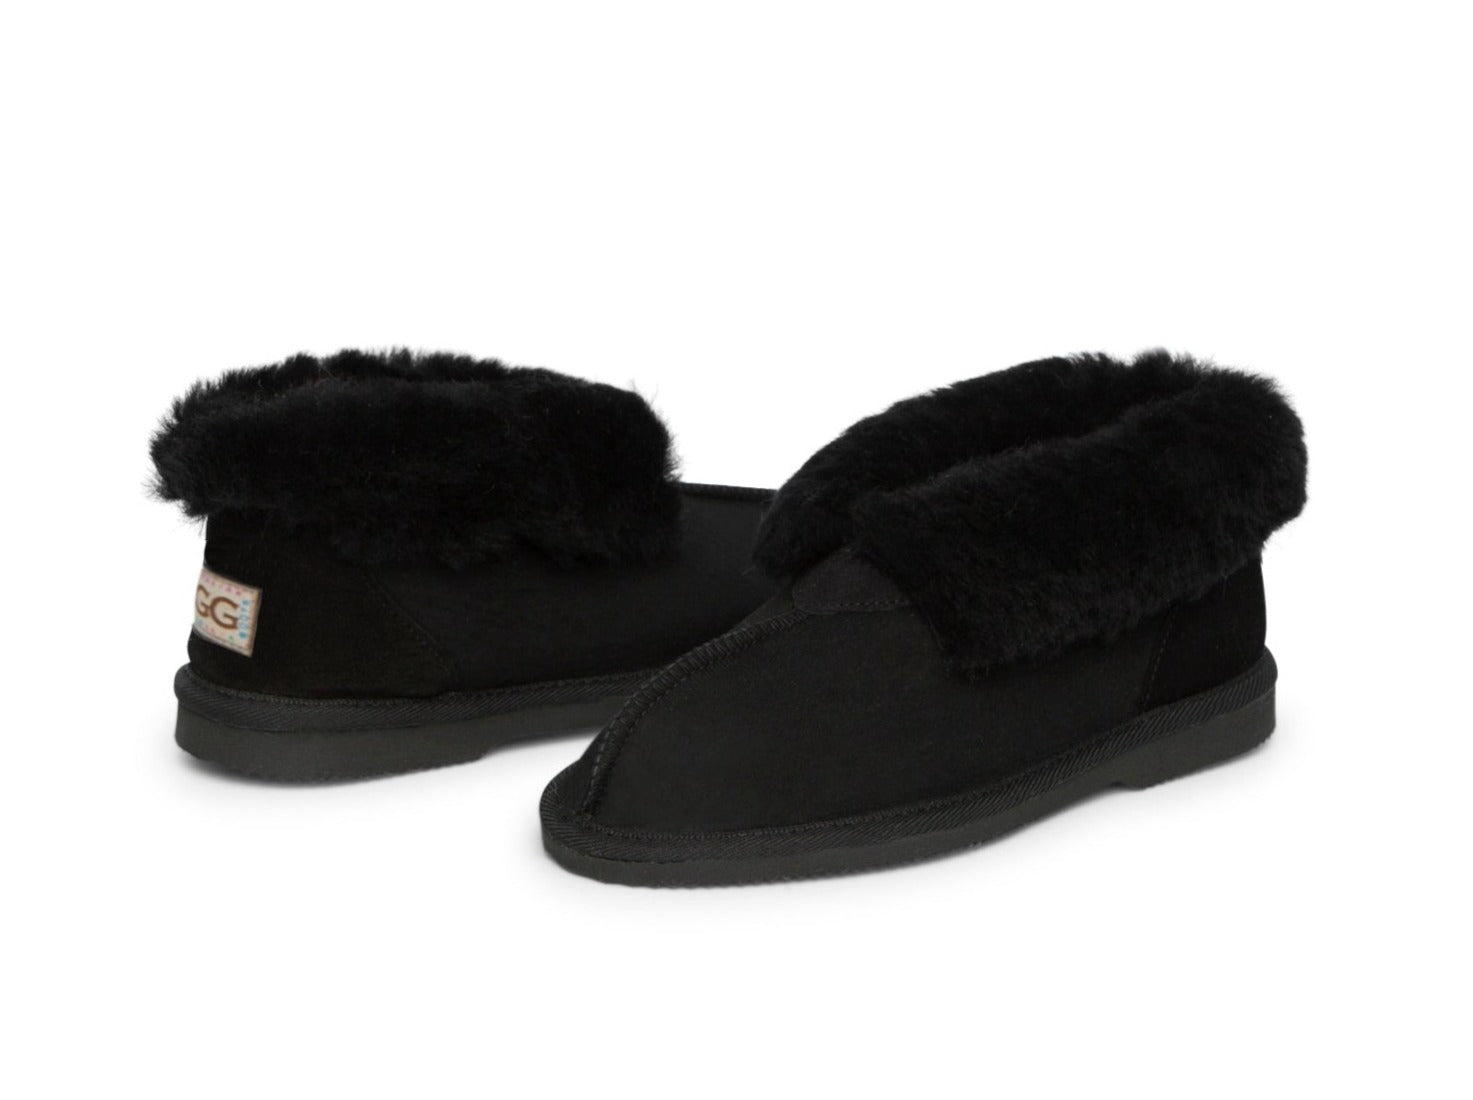 Kid's Ugg Slippers, with sheepskin rolled out at the top in black